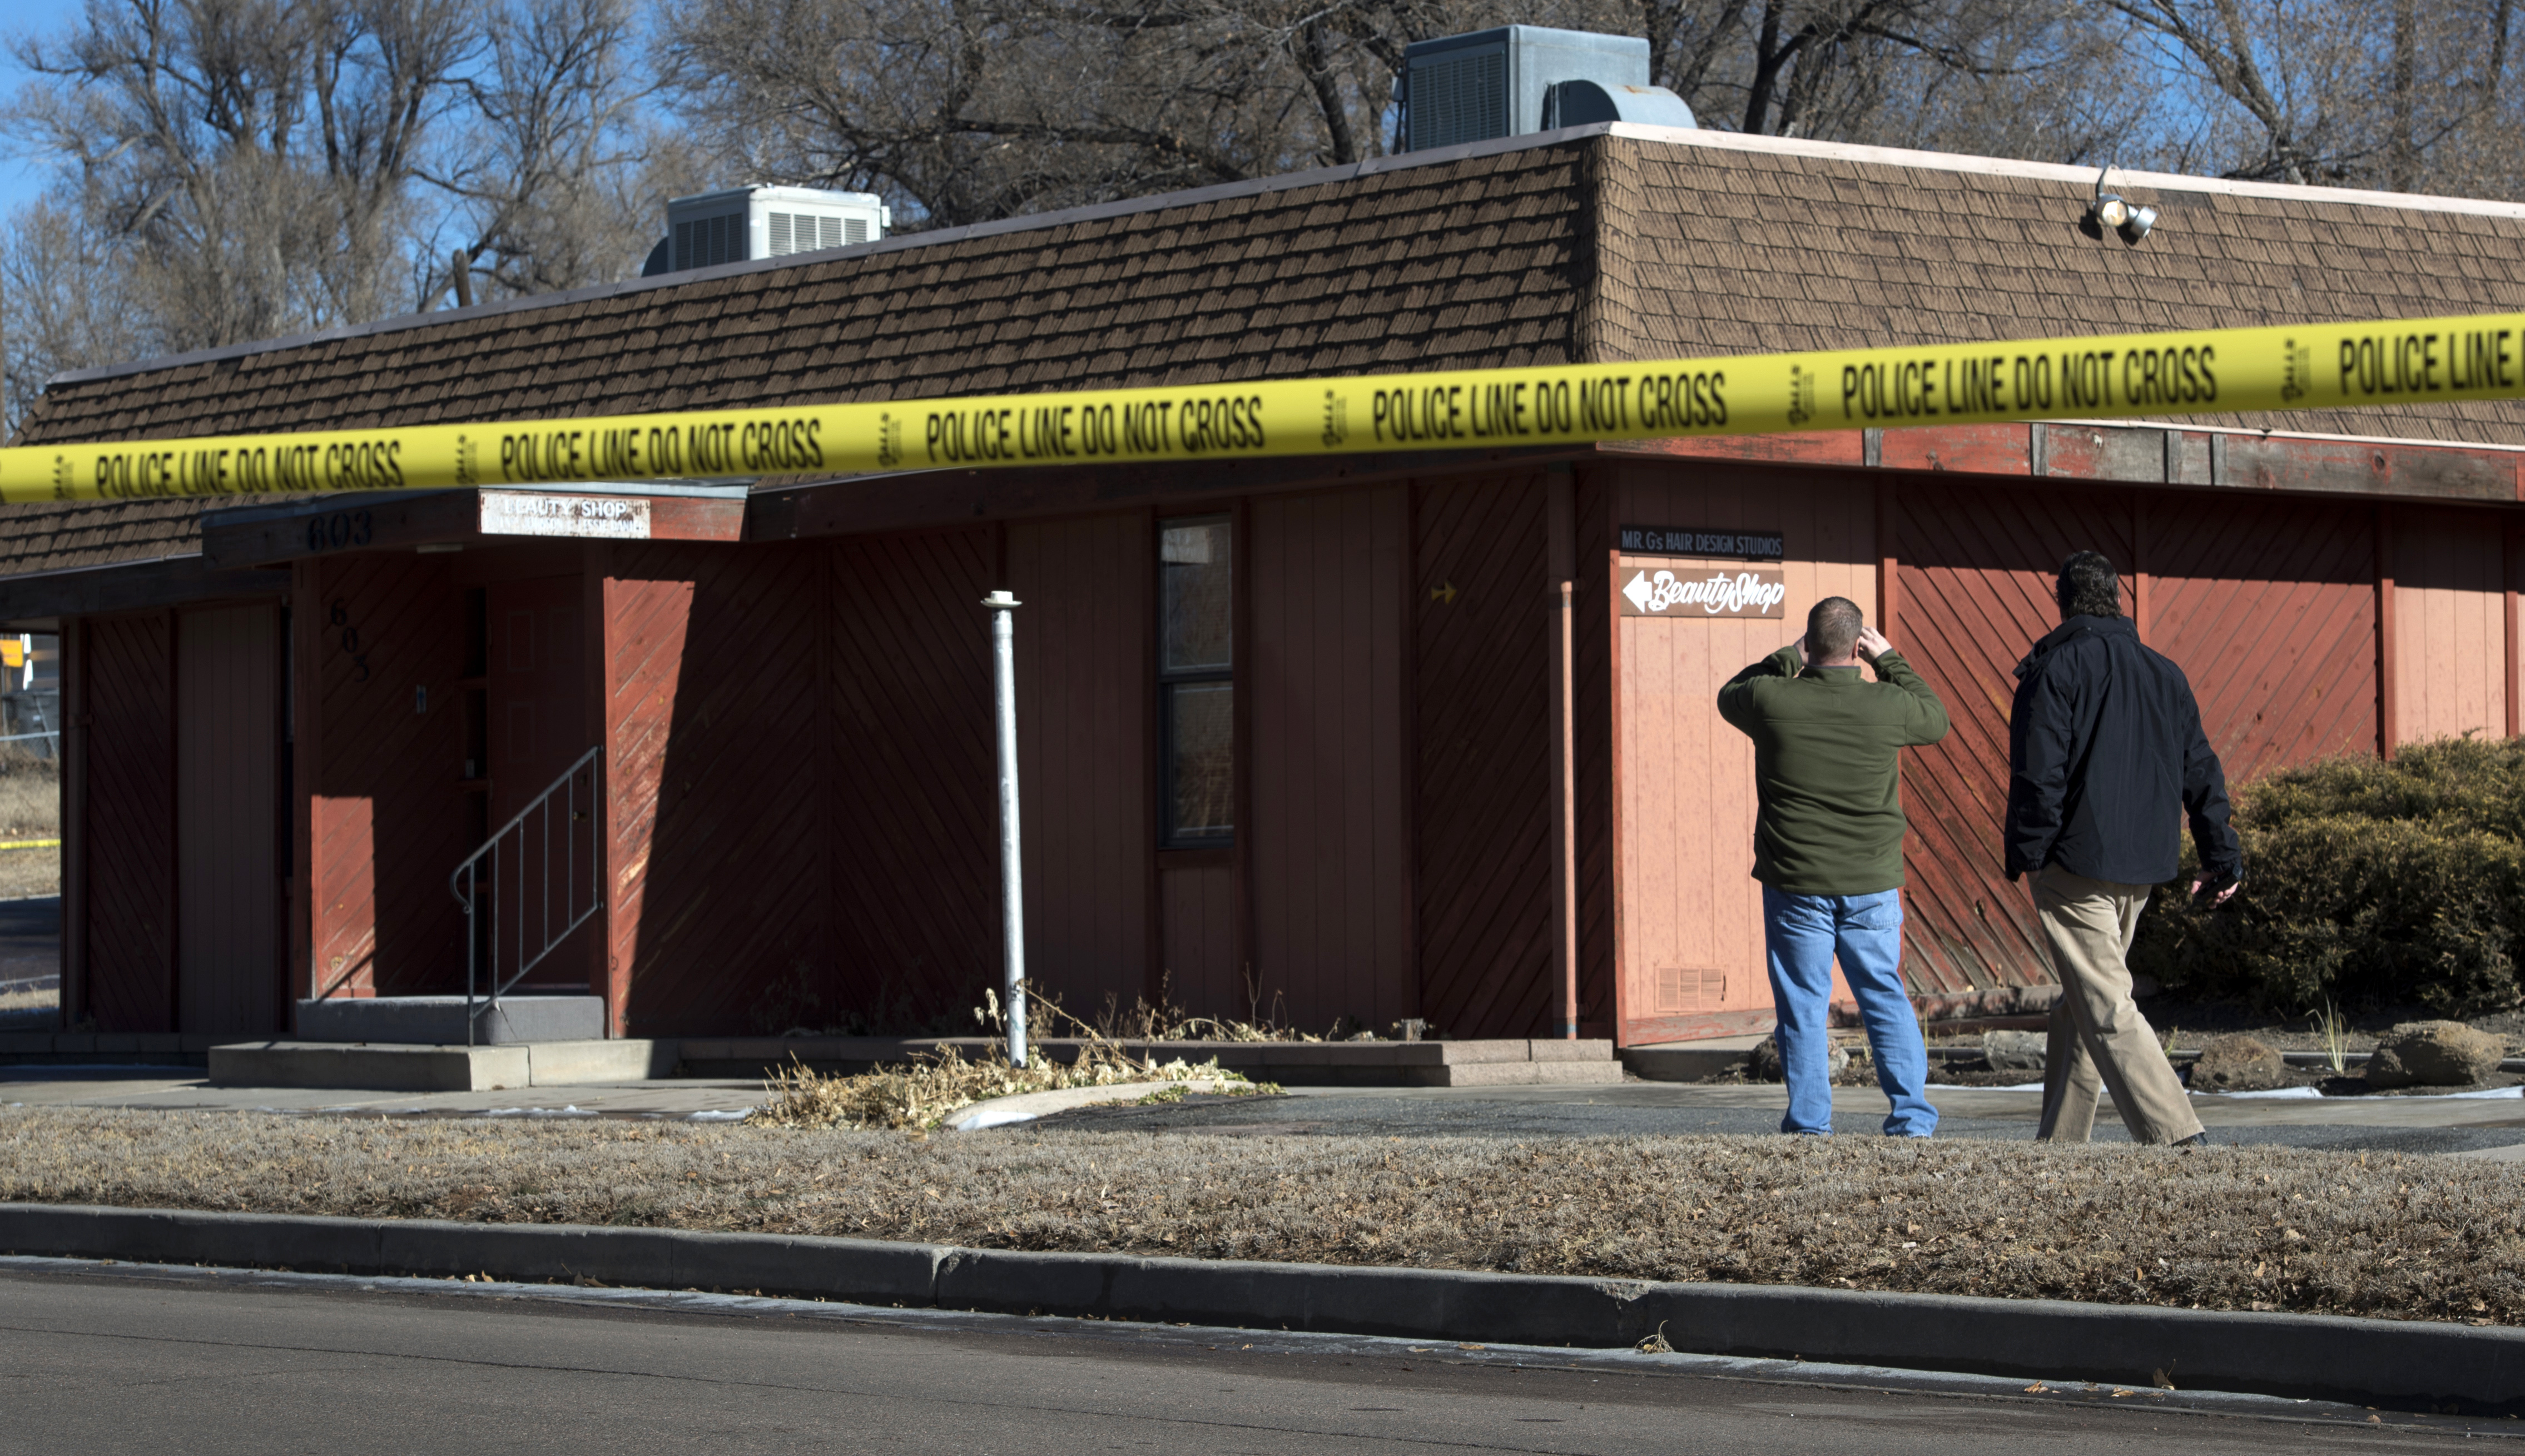 Colorado Springs police officers investigate the scene of an explosion on Jan. 6, 2015, at the NAACP's offices in Colorado Springs, Colo. (Christian Murdock—AP)